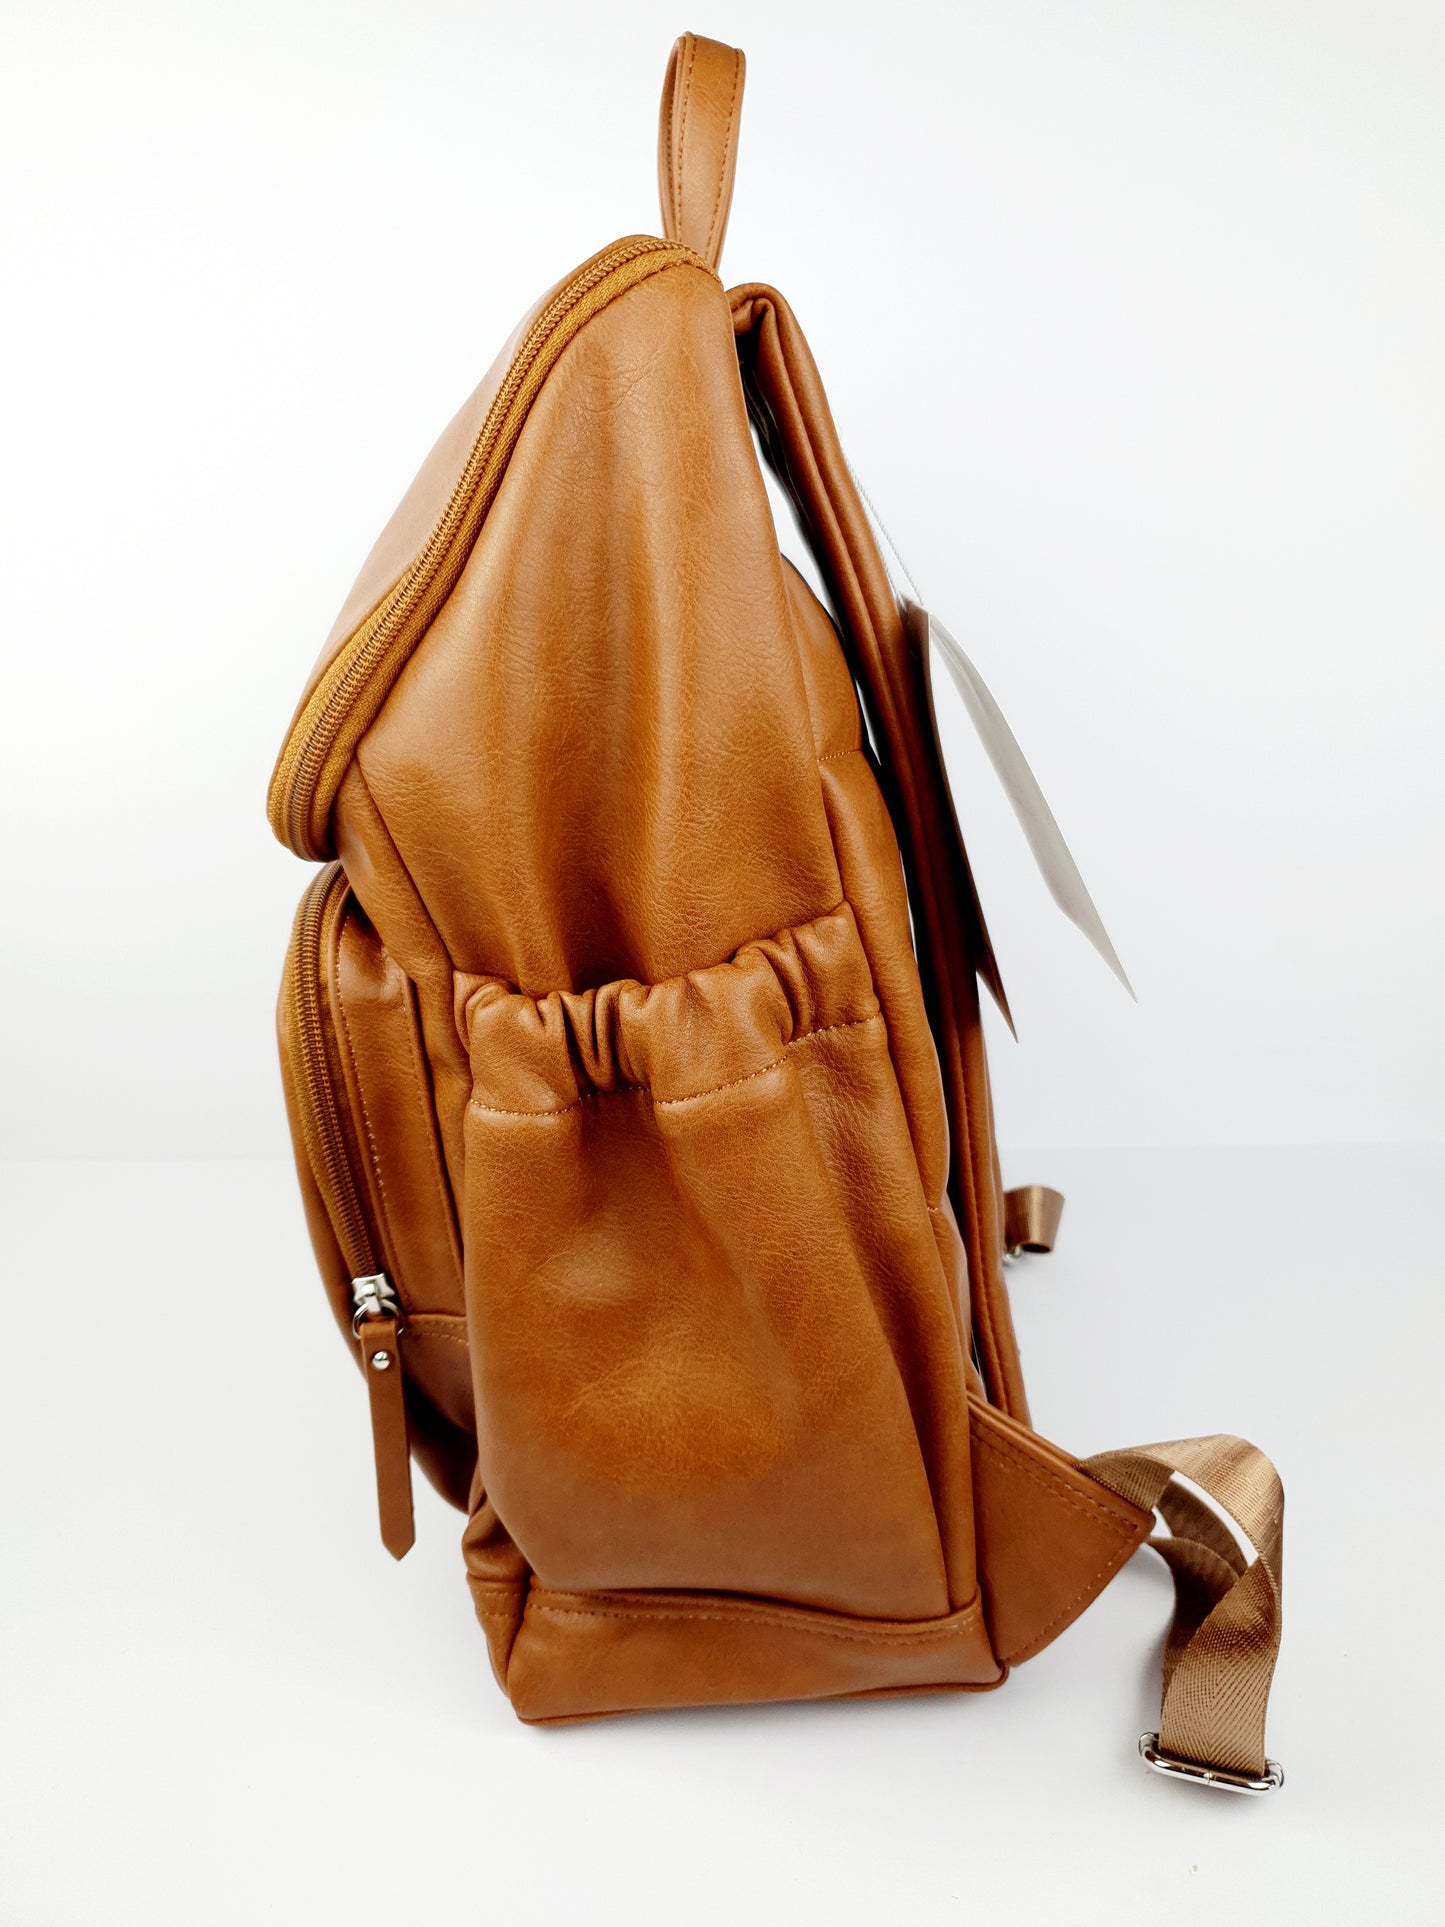 OiOi Faux Leather Baby Changing Backpack -Tan